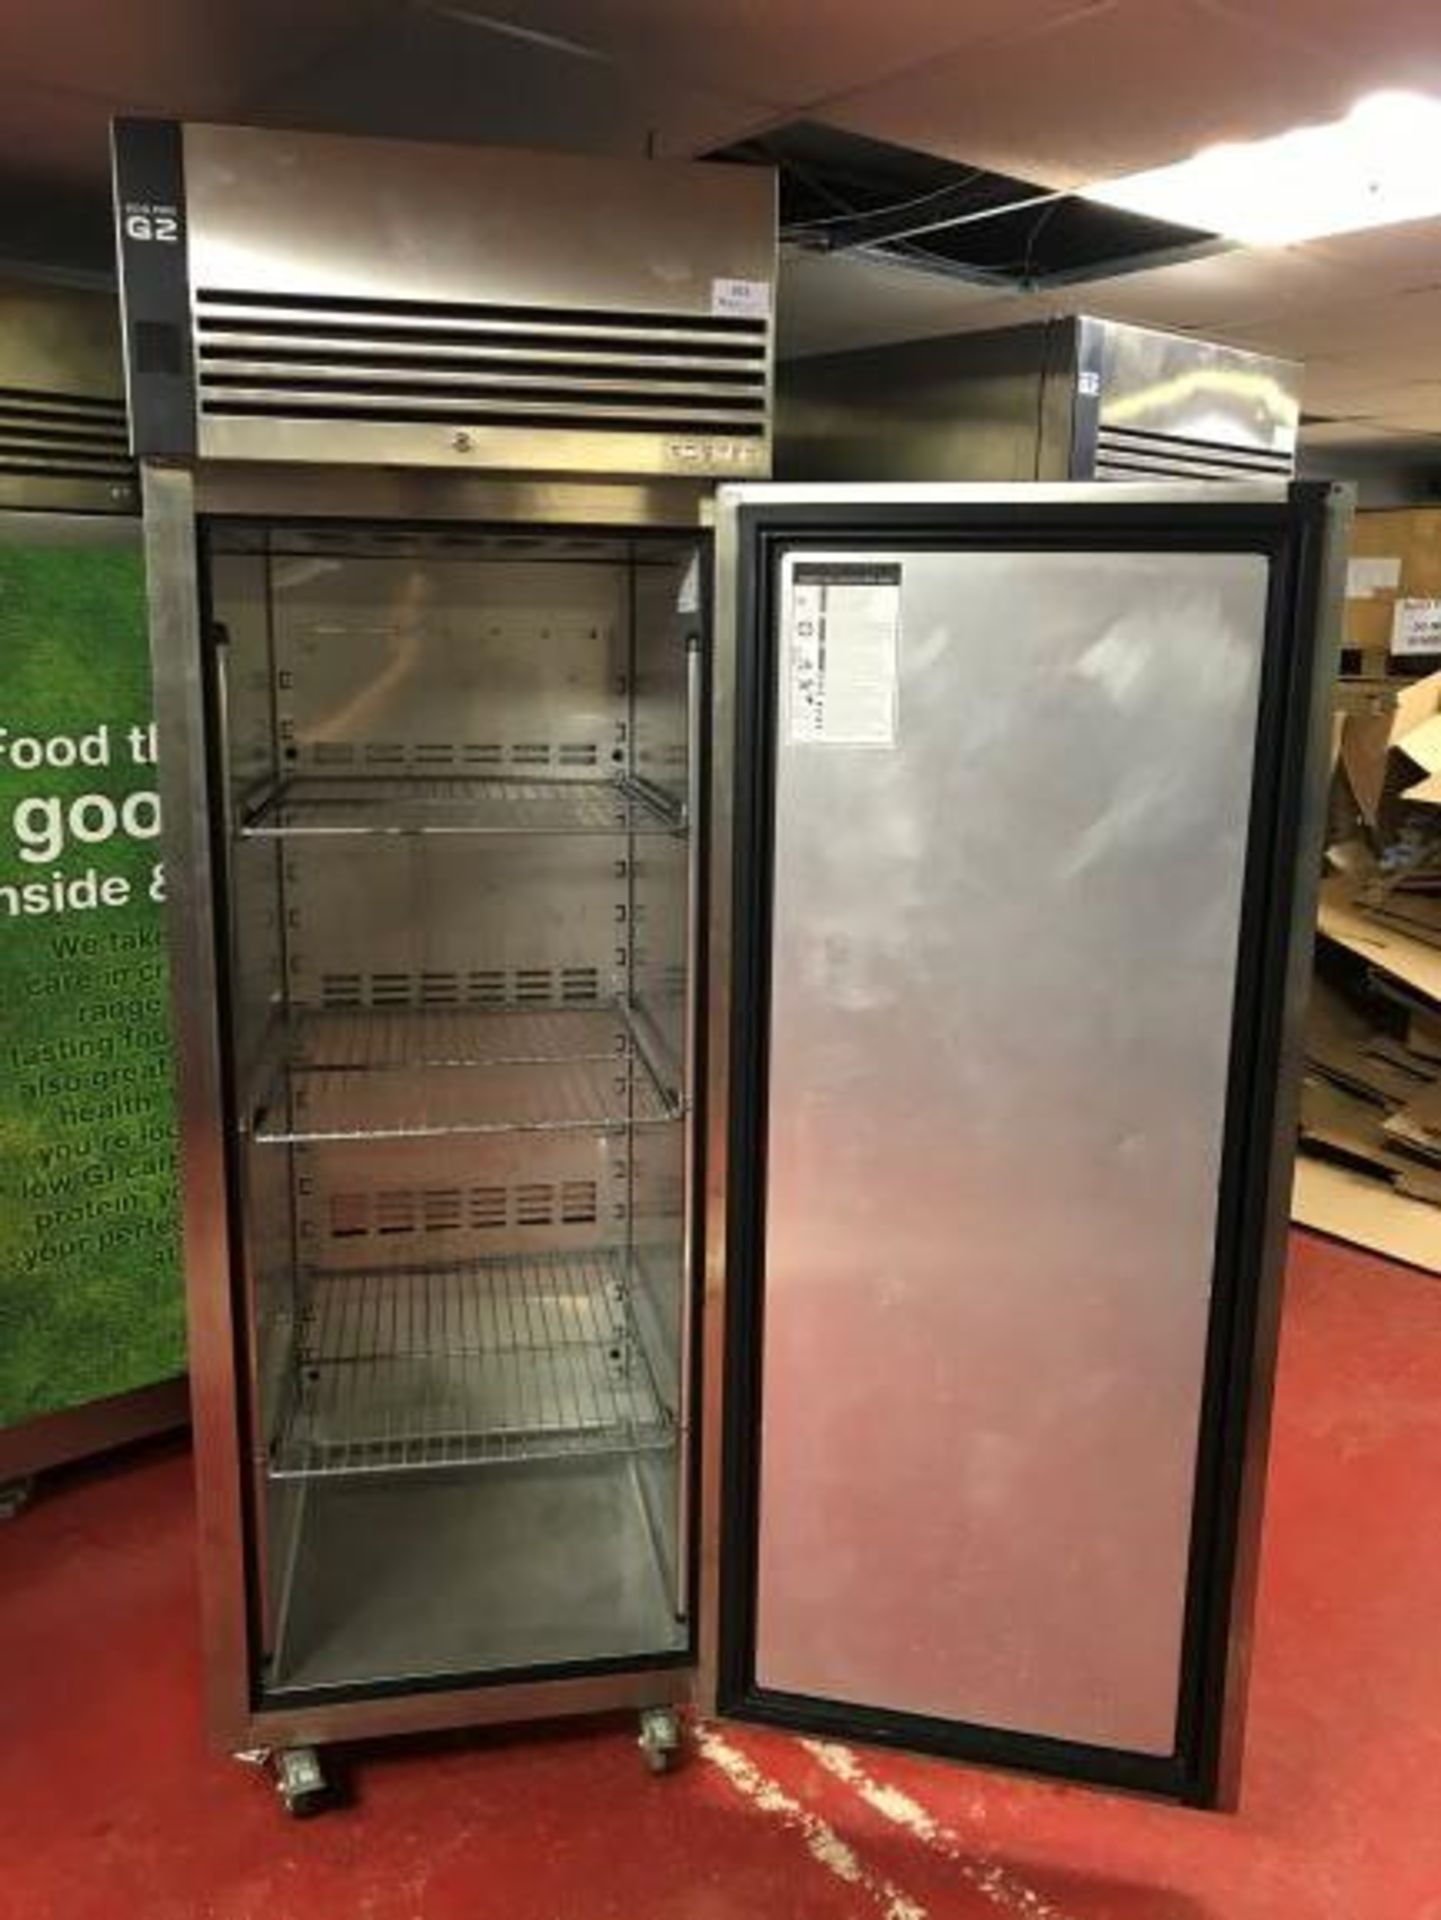 Foster Refrigeration ECOPRO G2 EP700L stainless steel single door upright freezer - Image 2 of 3